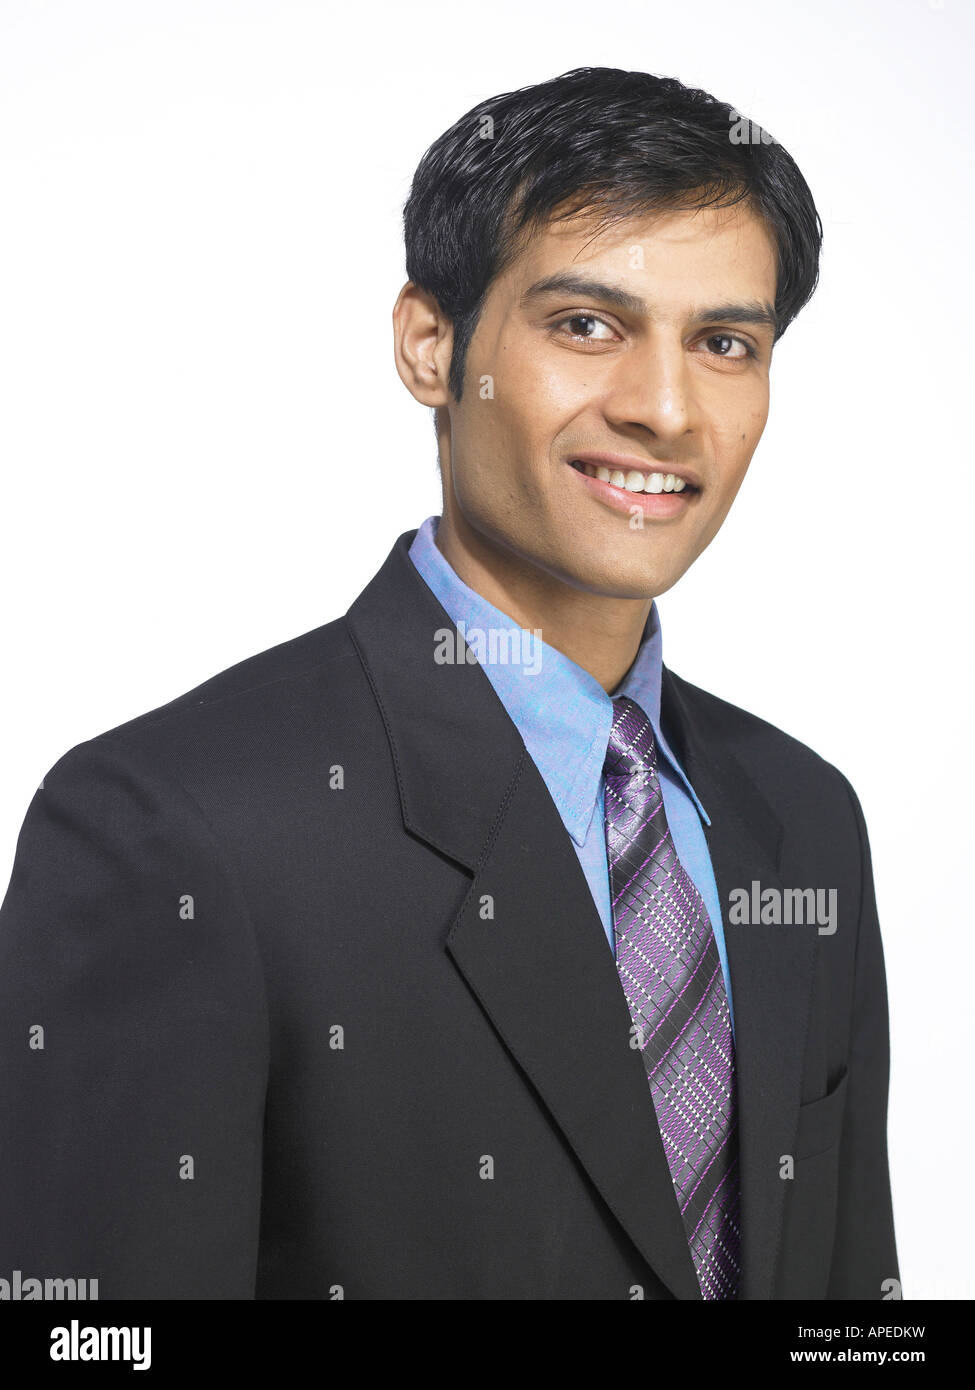 Portrait of South Asian Indian executive man MR Stock Photo